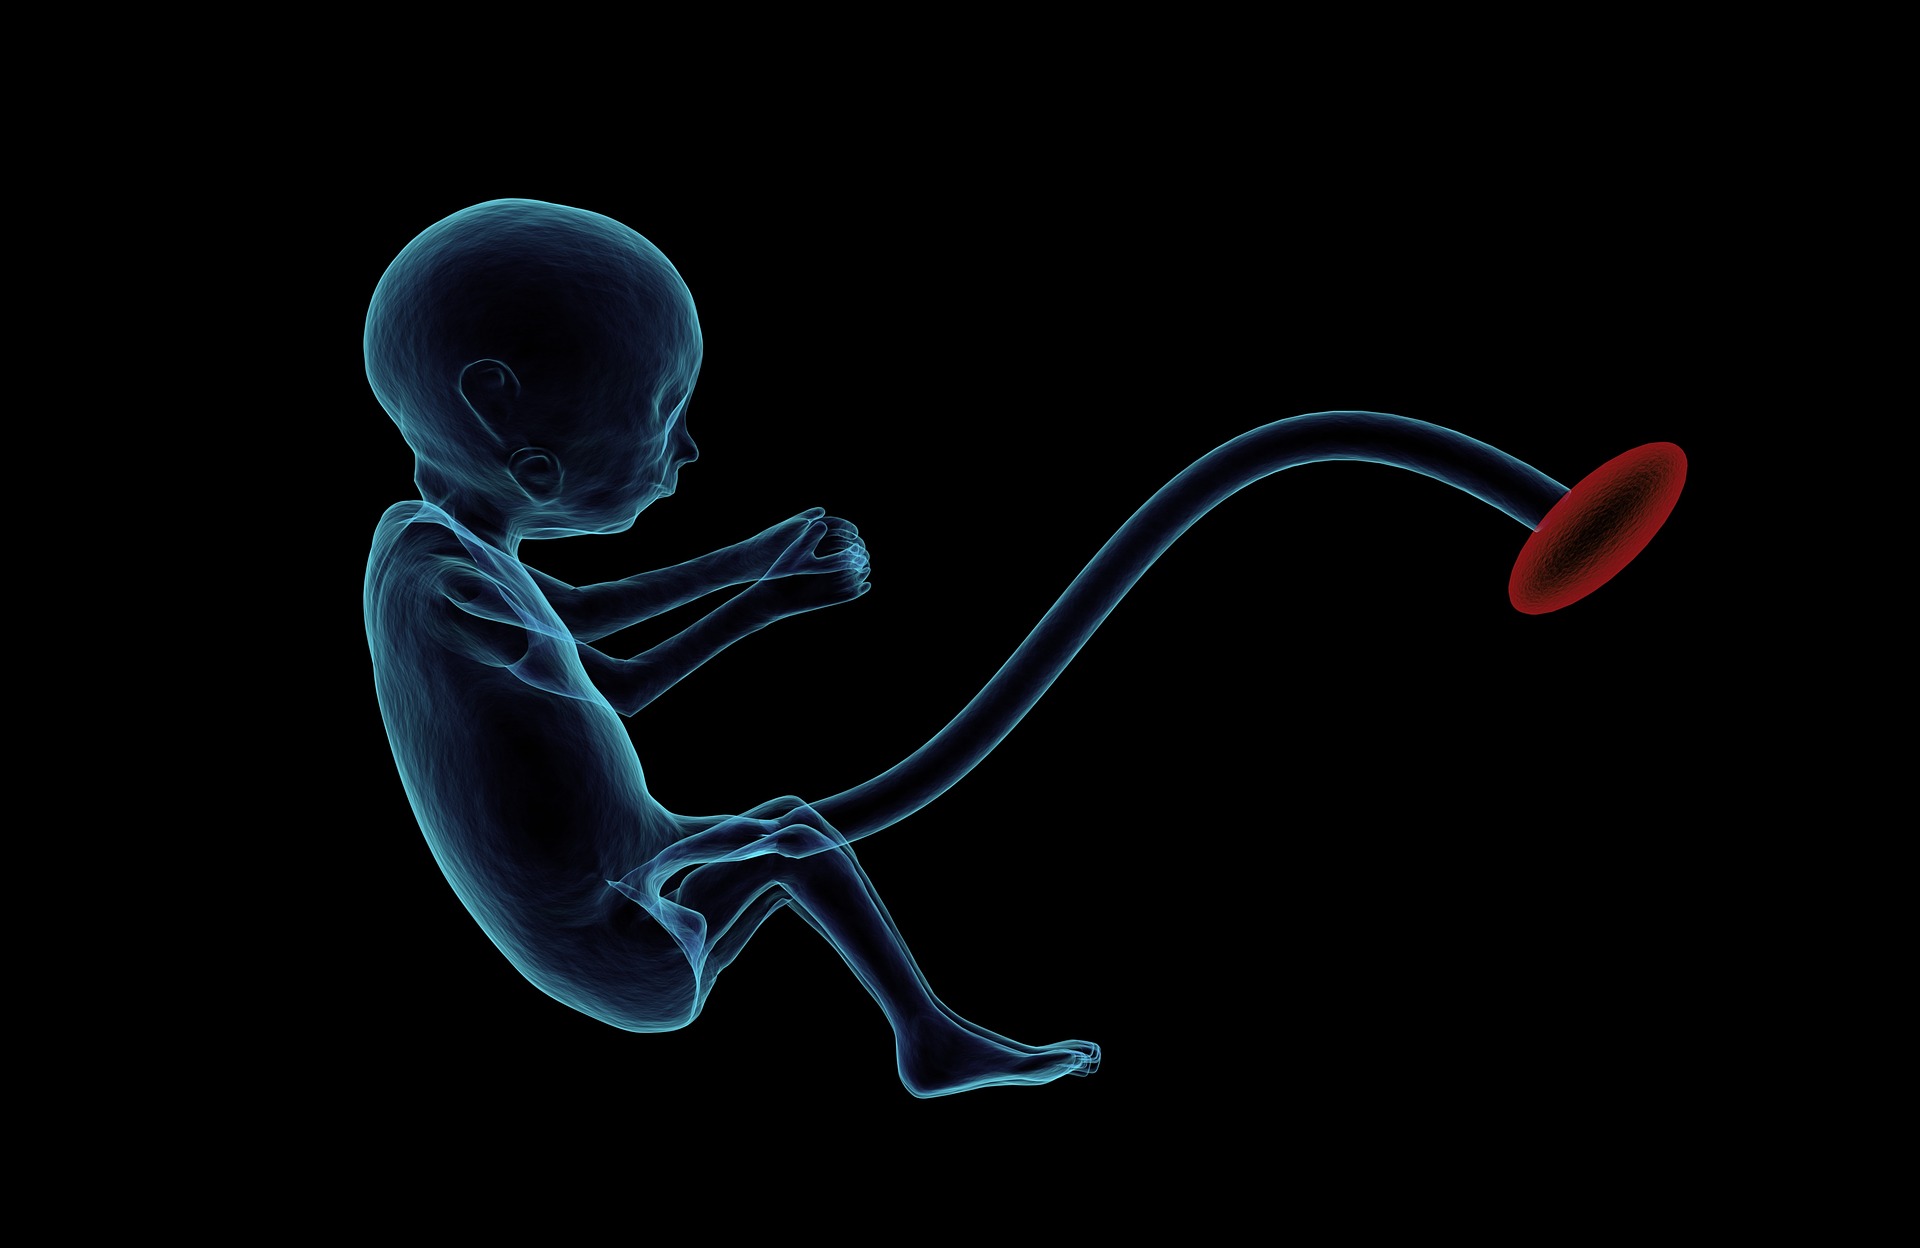 Foetus and umbilical cord containing cord blood stem cells